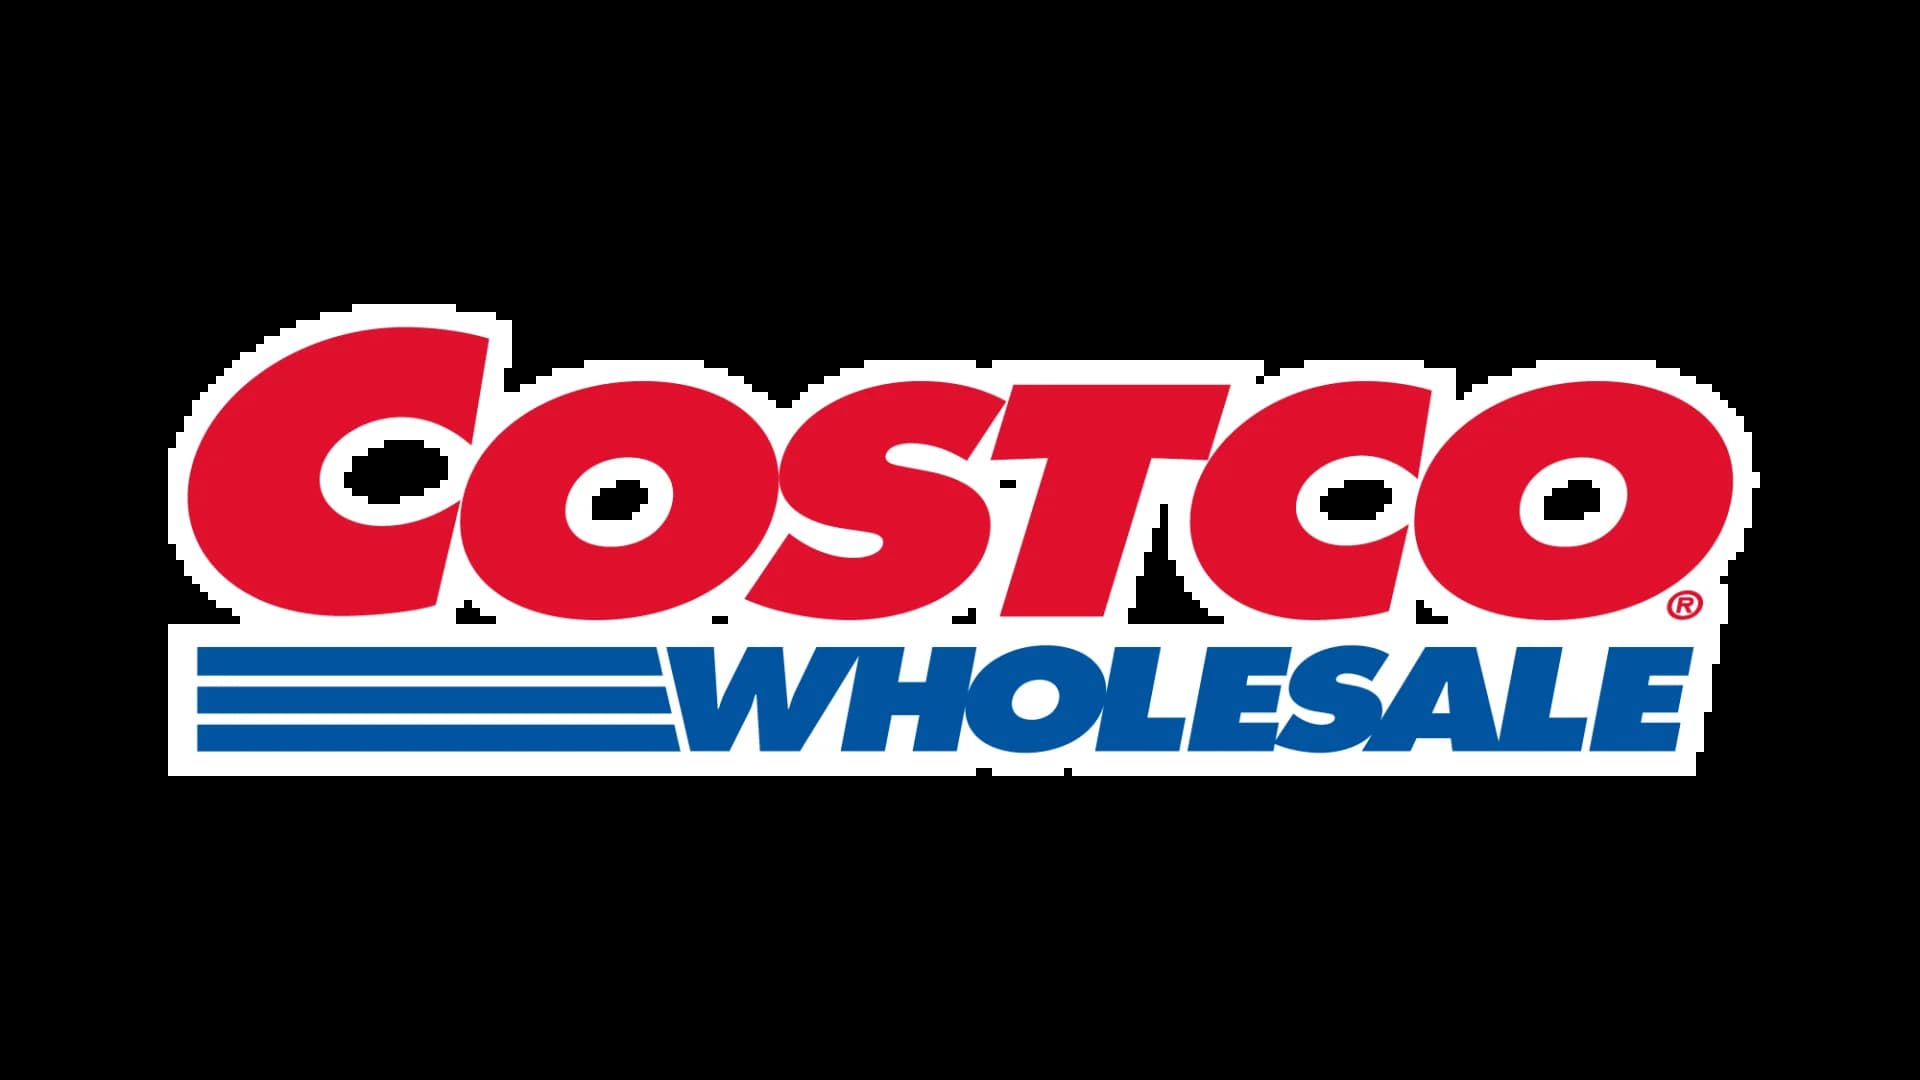 Costco changes membership policy to limit amount of people in stores